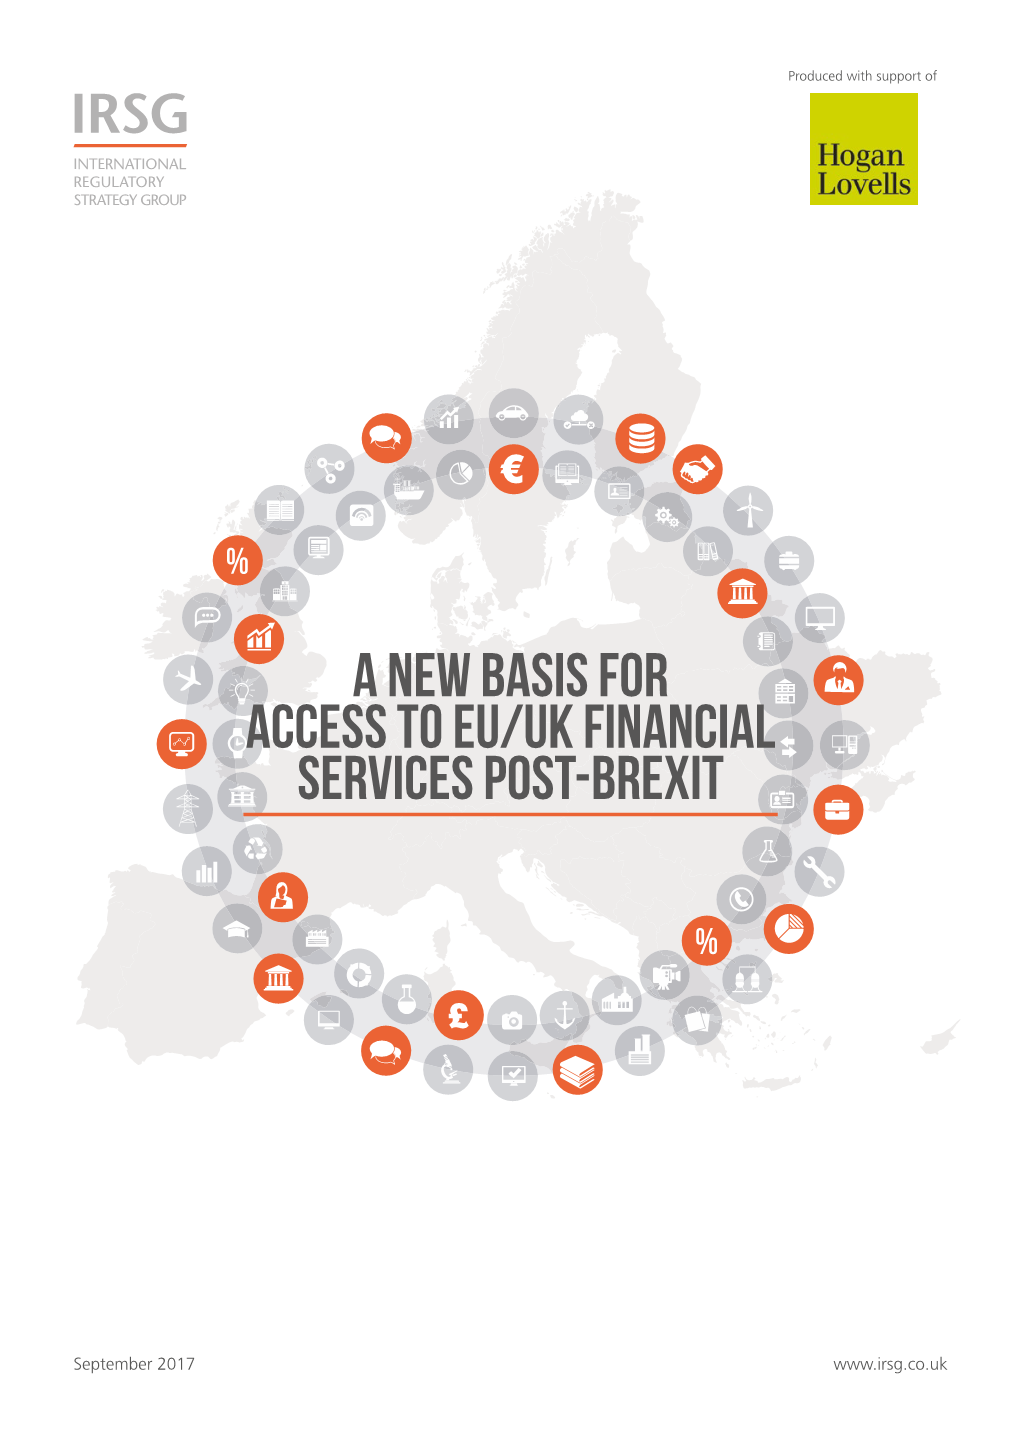 A New Basis for Access to Eu/Uk Financial Services Post-Brexit